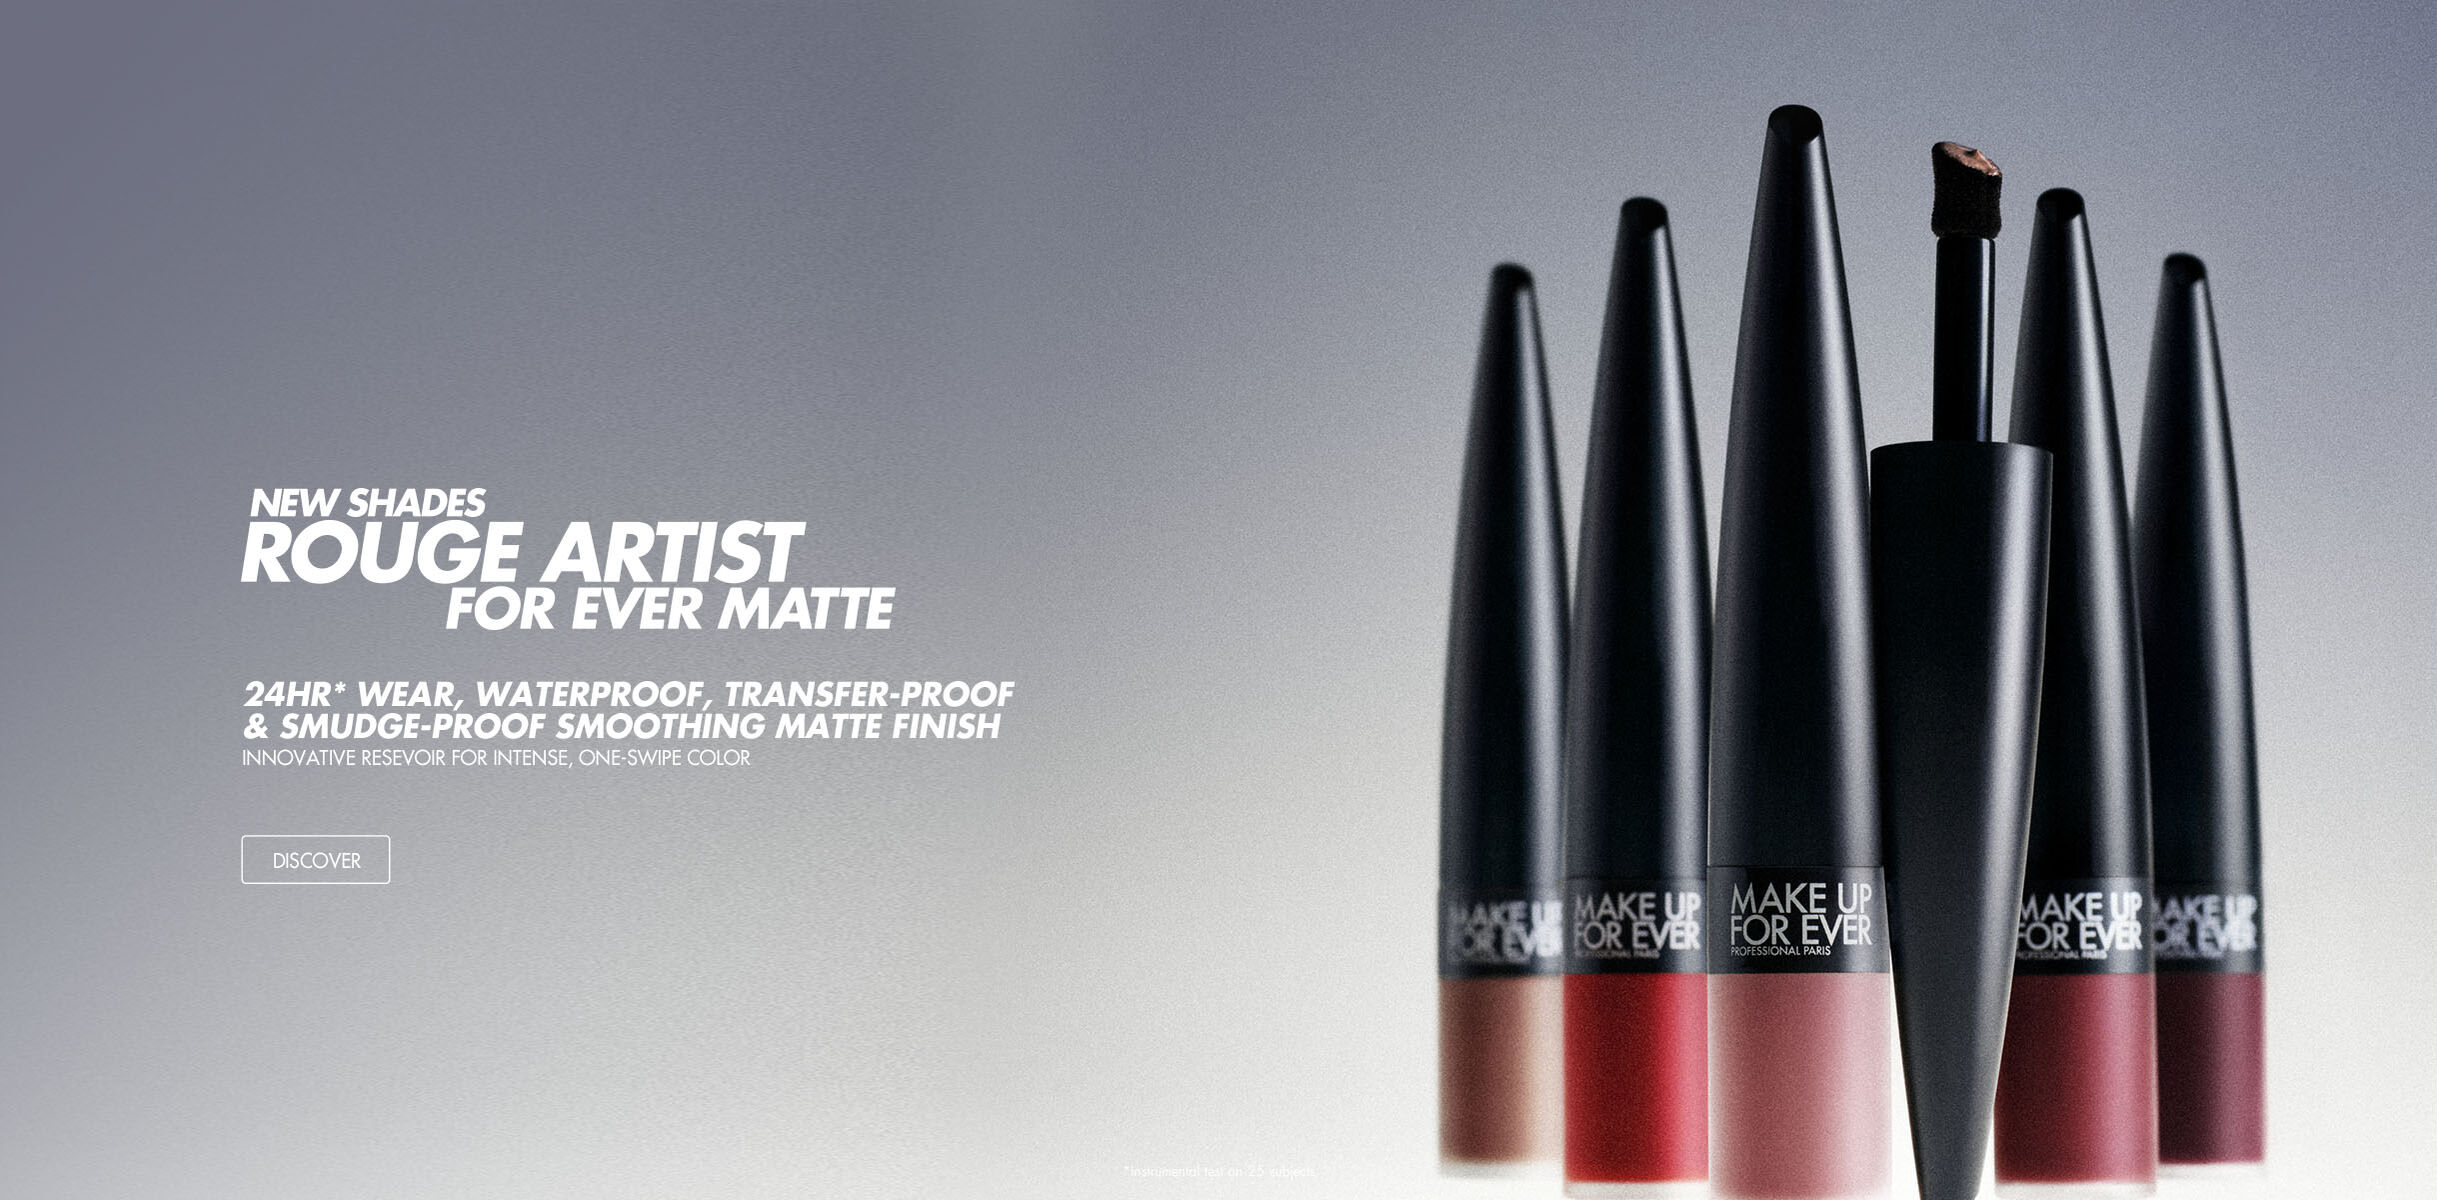 NEW SHADES - ROUGE ARTIST FOR EVER MATTE